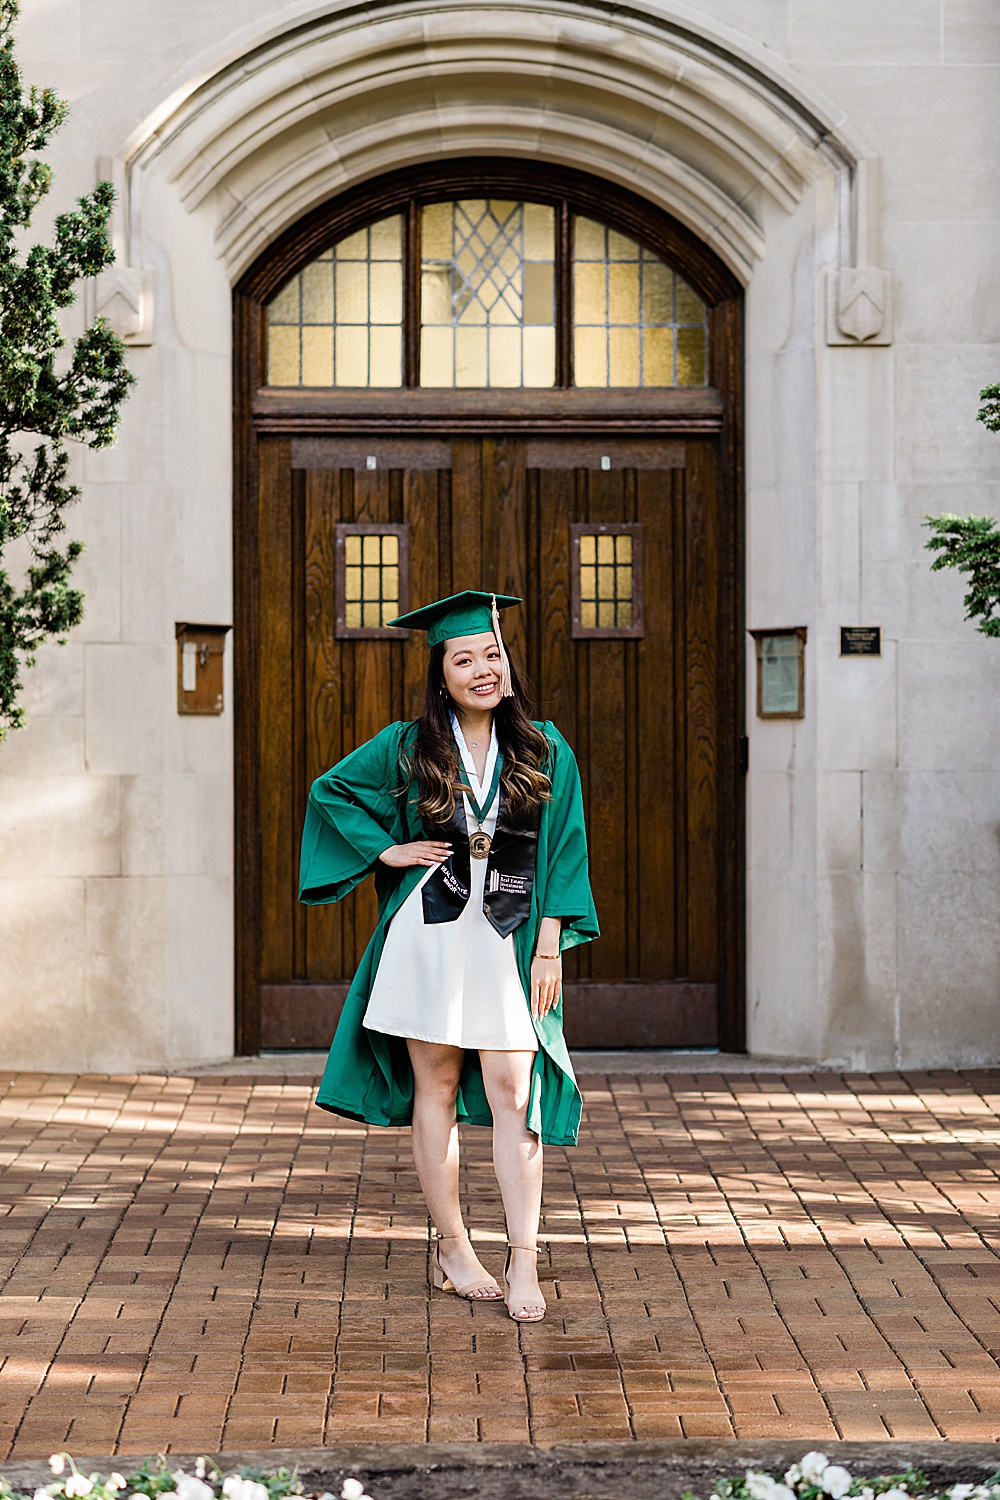 Michigan State Senior grad photoshoot on MSU's campus, photo of a woman in a white dress and cap and gown standing in front of the Beaumont Tower door, by Allie Siarto & Co., East Lansing photographers